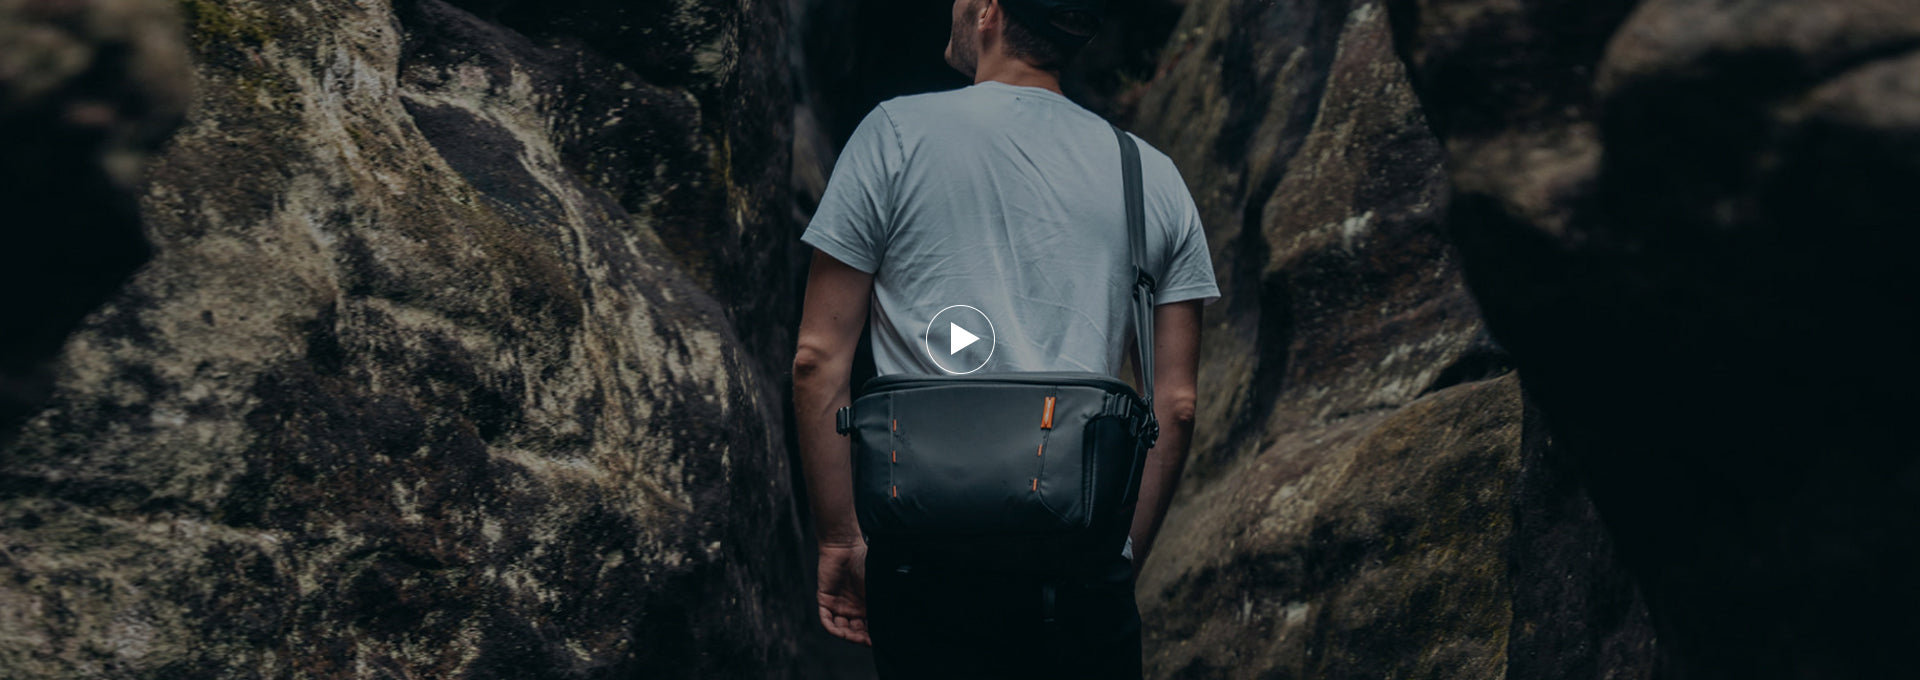 OneMo 2 Backpack - An excellent Photography pack for Adventure Travel